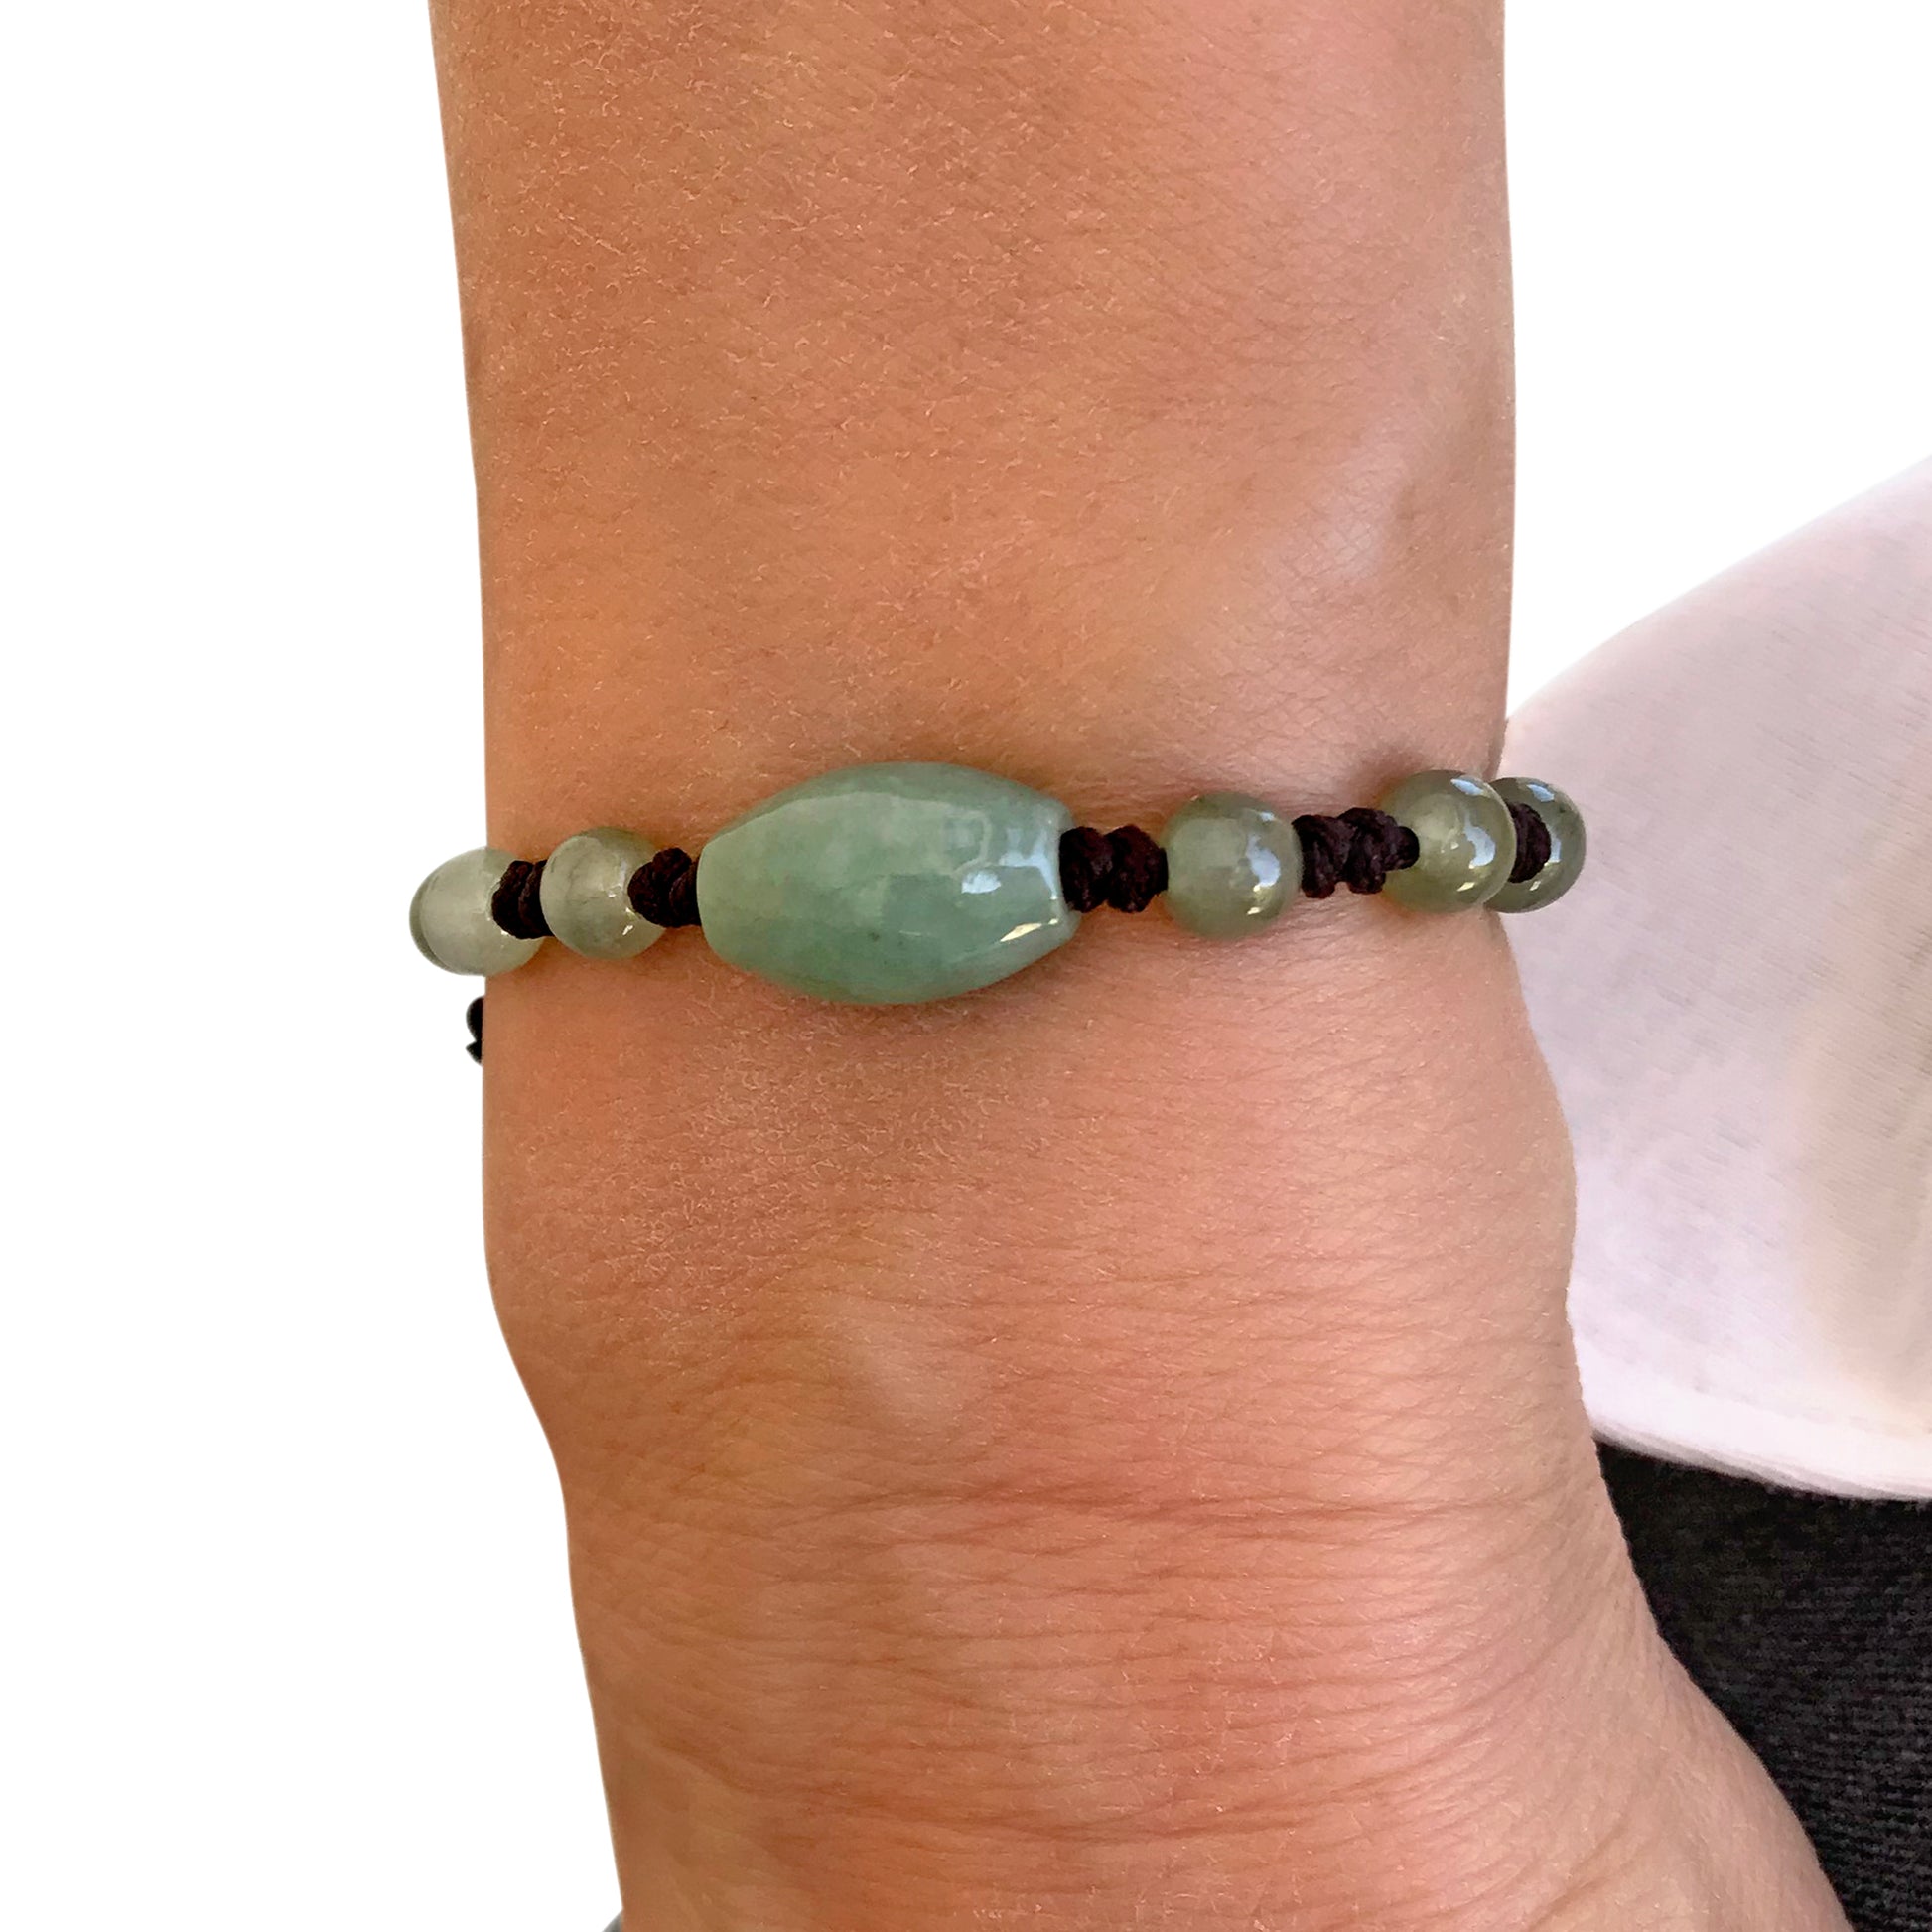 Create a Unique Look with an Oblong Shaped Beads Jade Bracelet